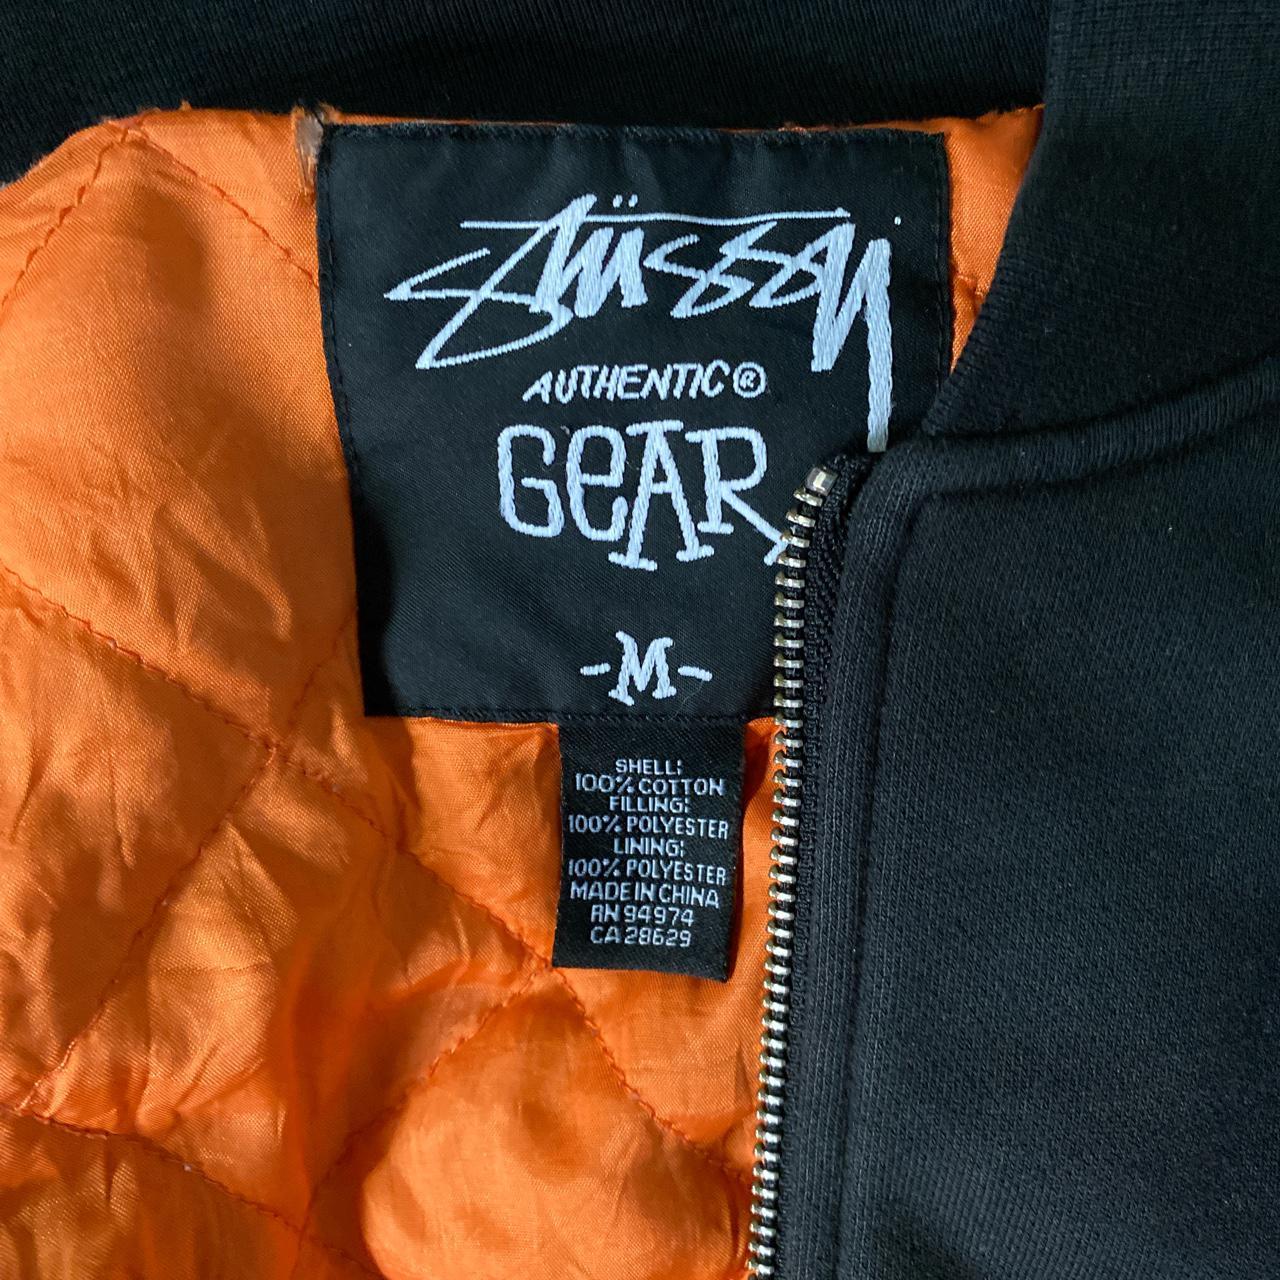 Vintage Stussy Authentic Gear Bomber Jacket, OFFERS